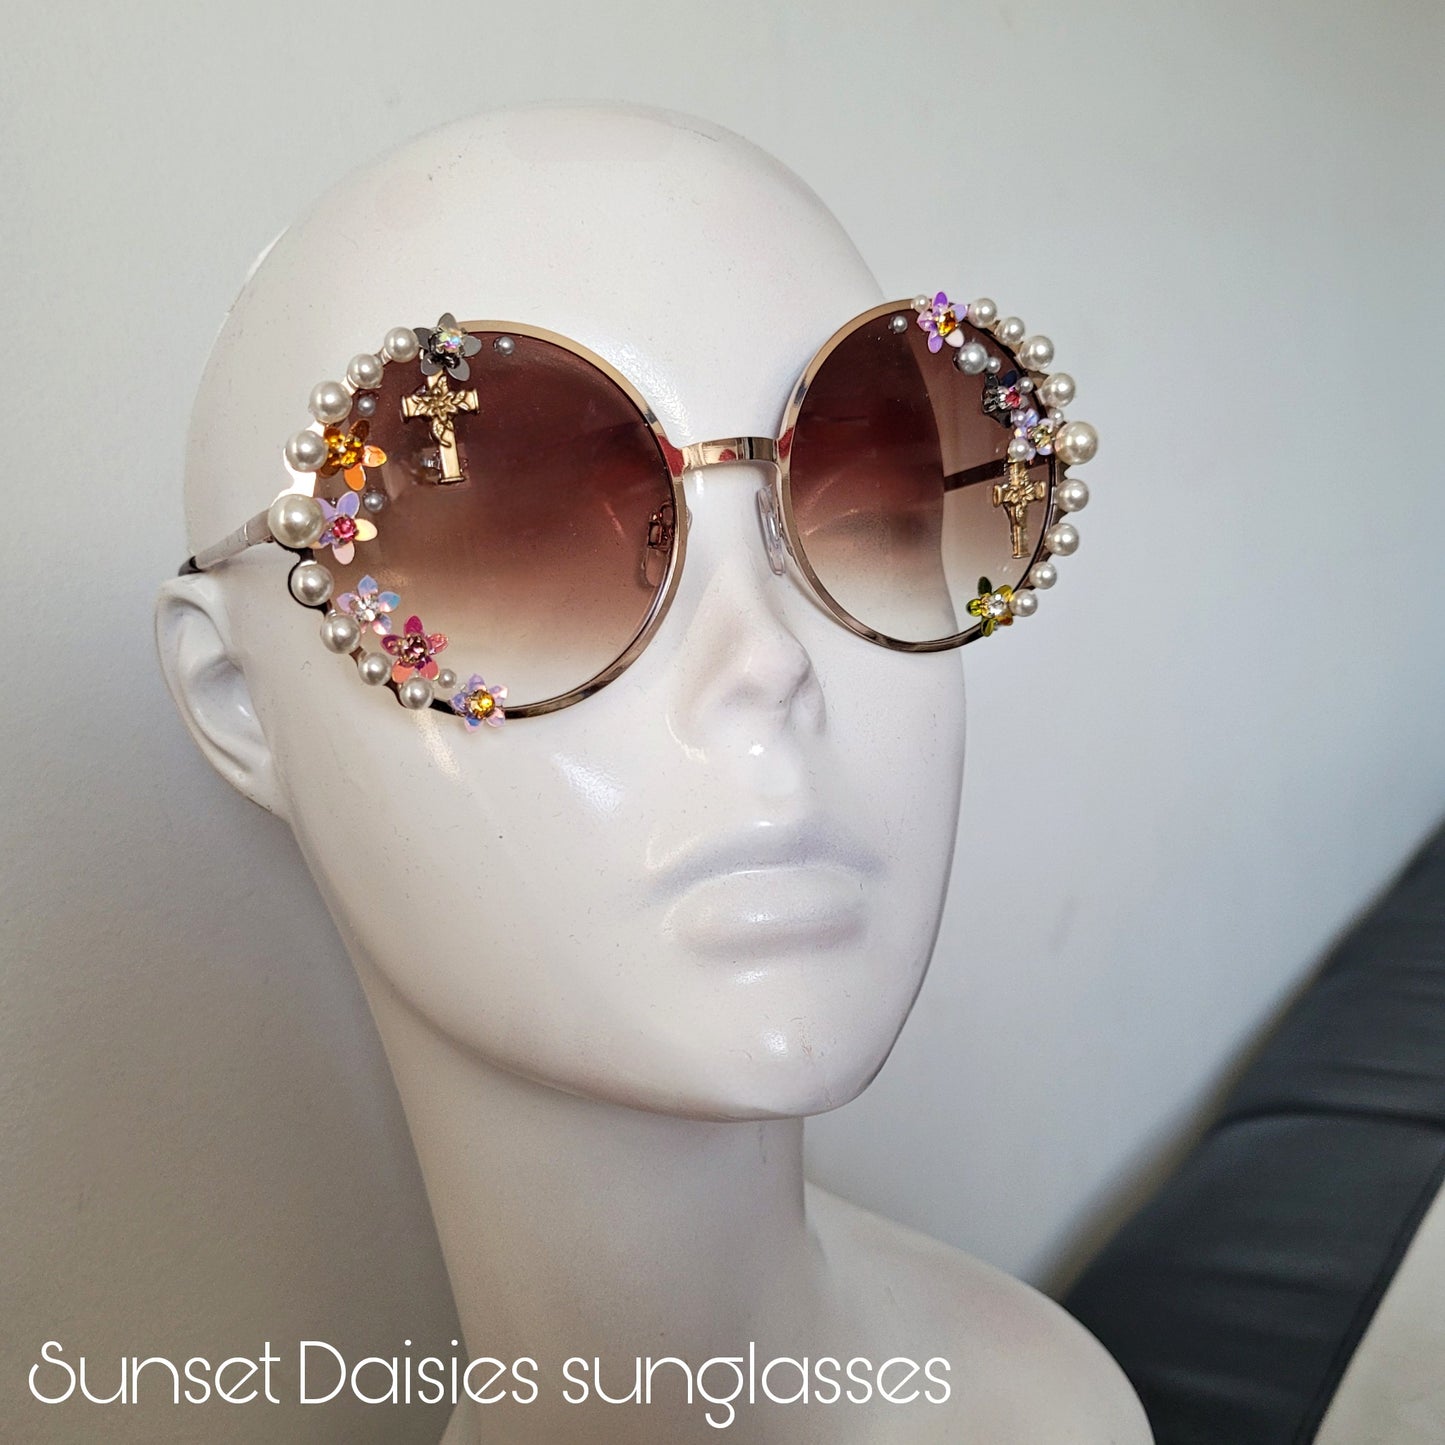 Flower & Pearls collection: The Sunset Daisies Sunglasses